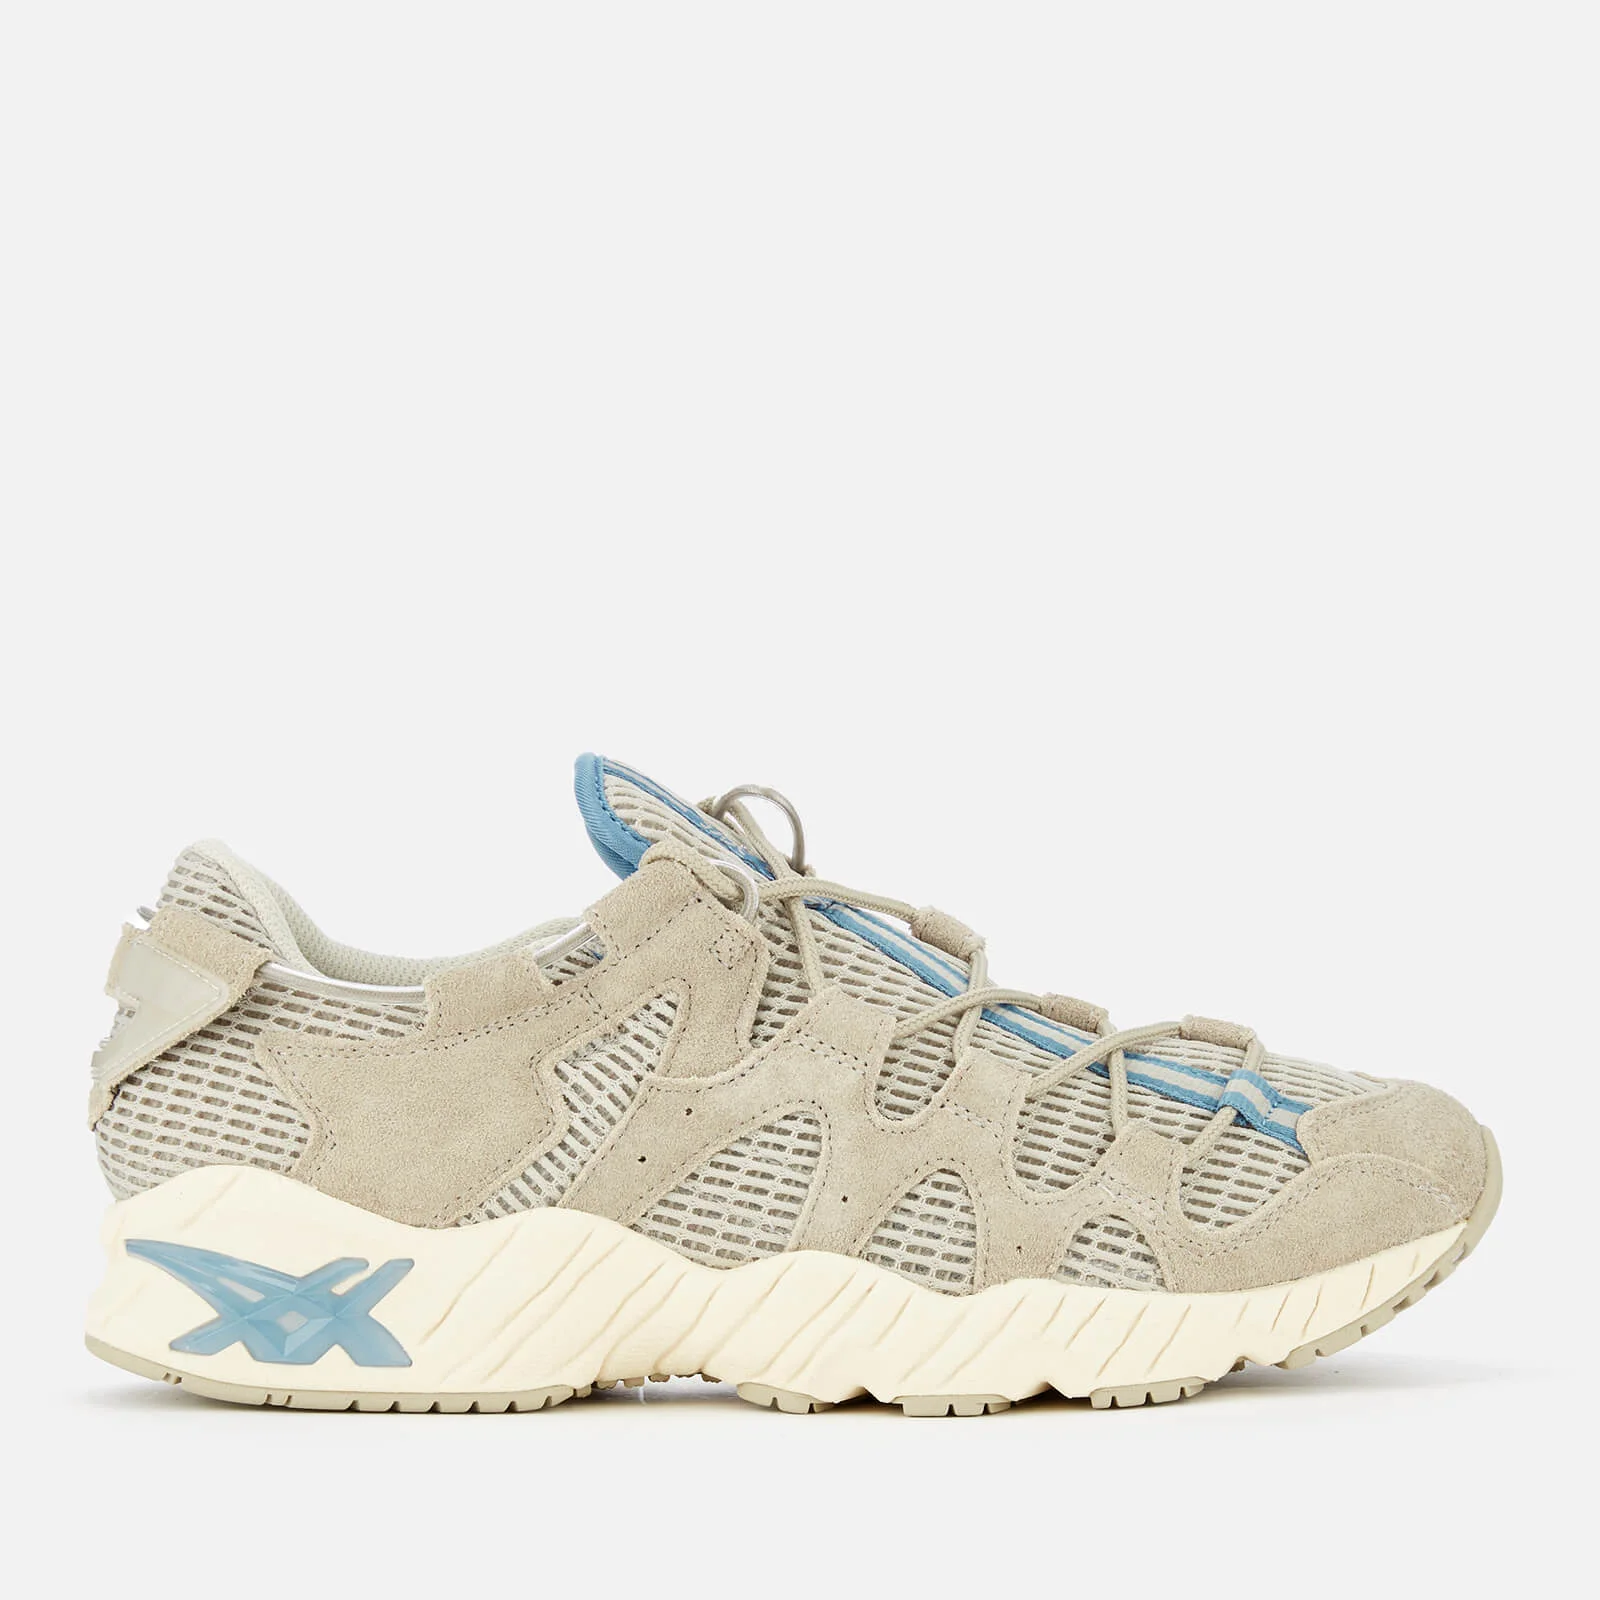 Asics Lifestyle Men's Gel-Mai Mesh Trainers - Feather Grey Image 1